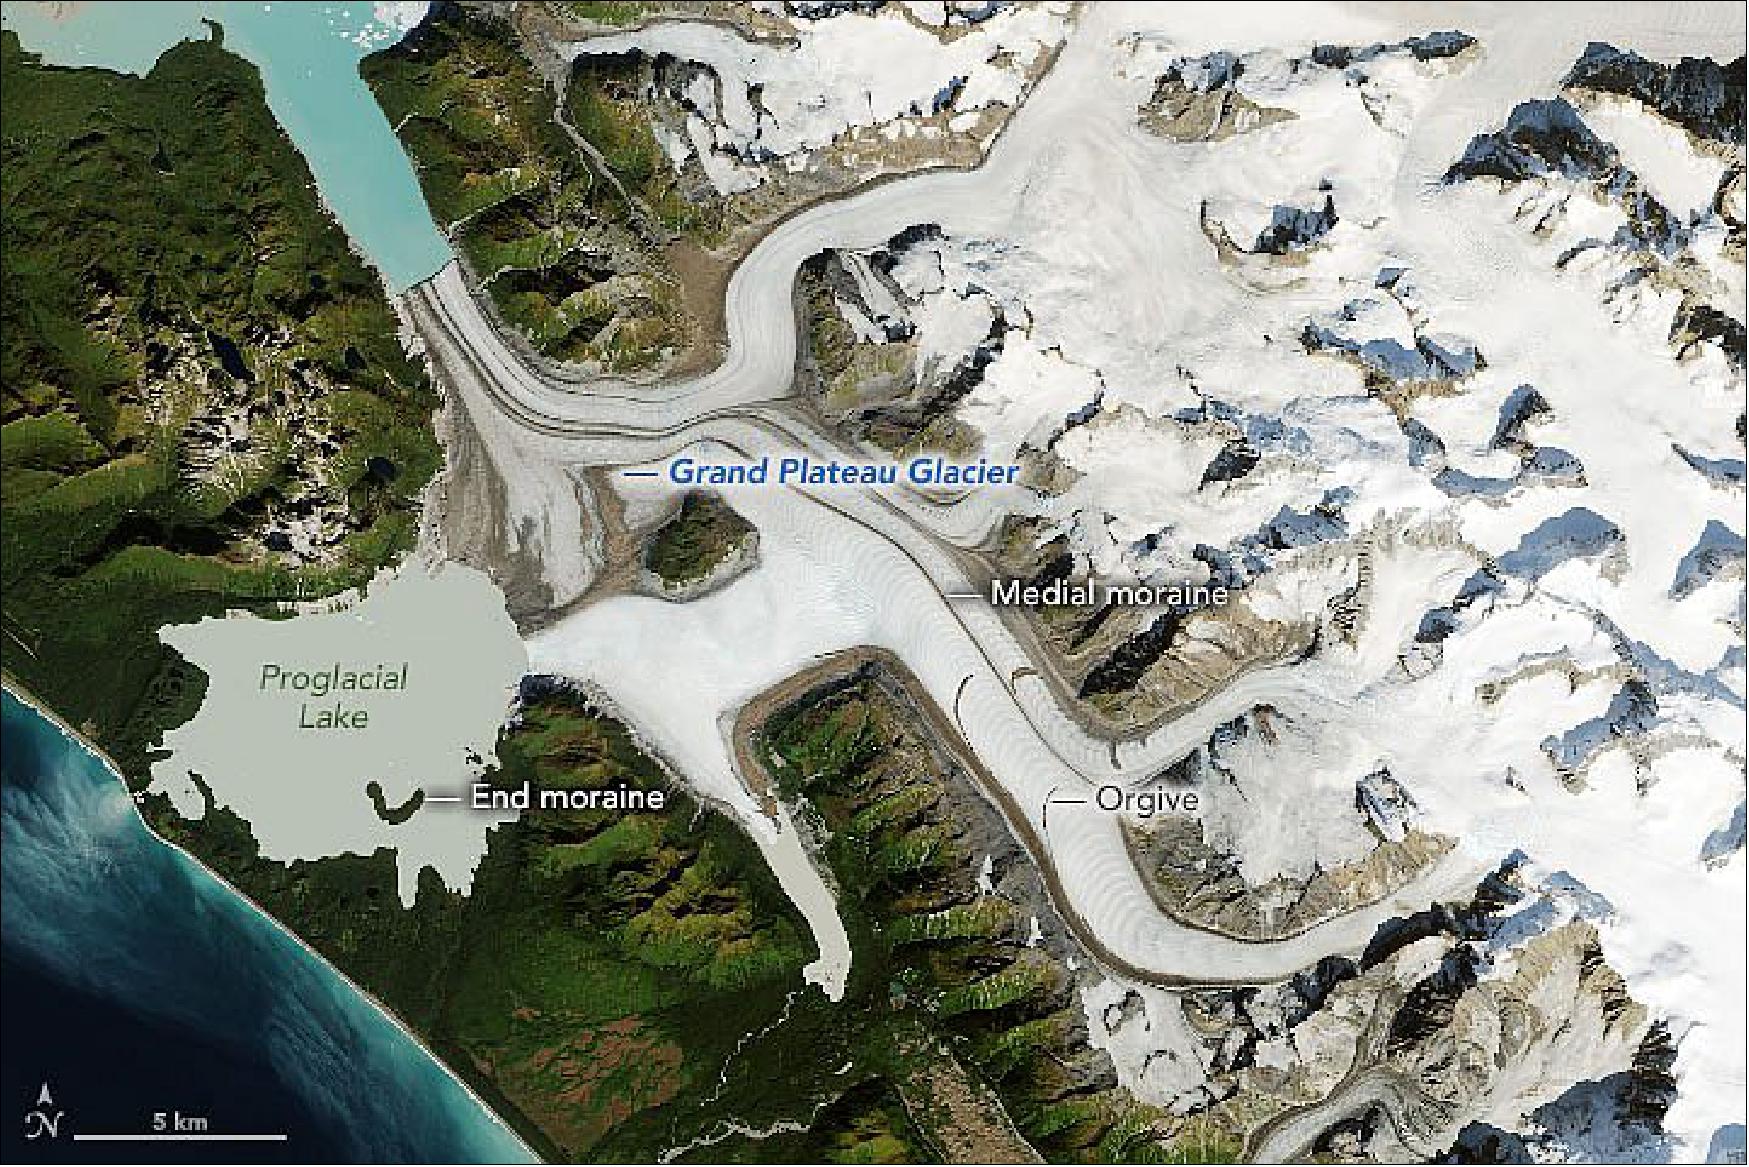 Figure 55: This image of the remote Grand Plateau Glacier, located about 50 km west of Glacier Bay across the Fairweather Range, was acquired on September 17, 2019, with Landsat-8 (image credit: NASA Earth Observatory)